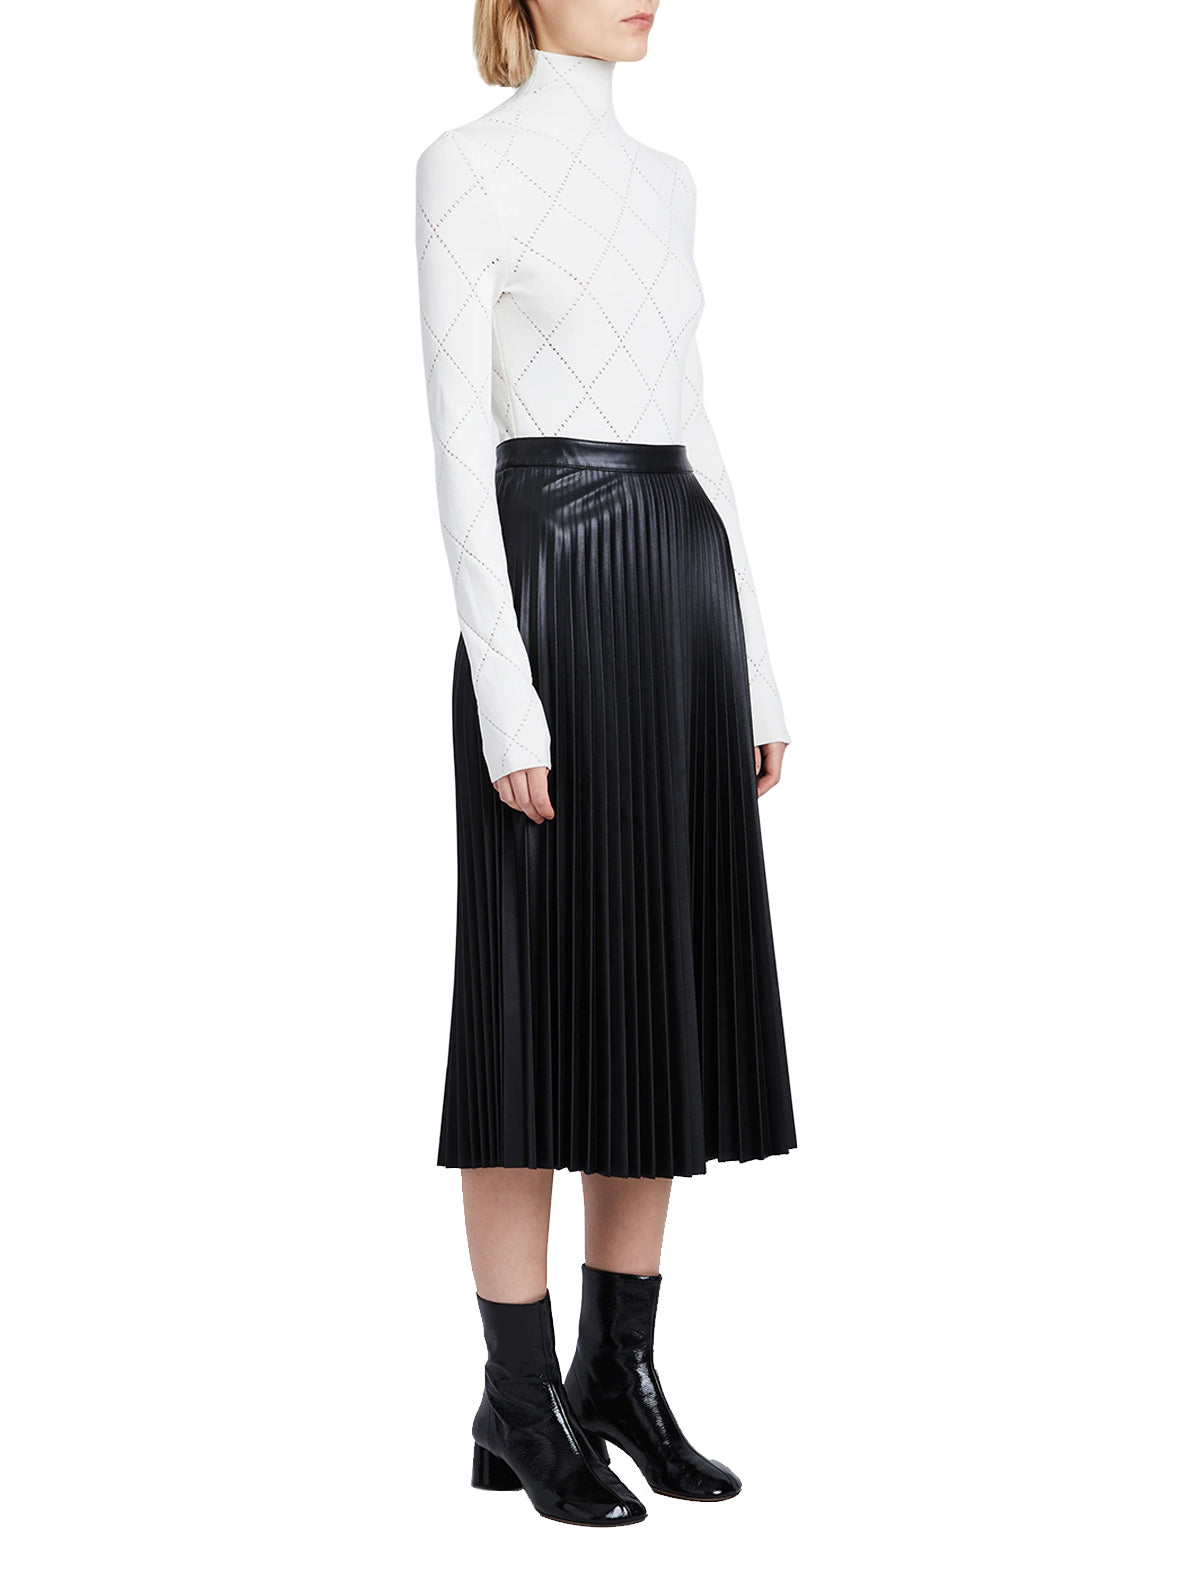 PROENZA SCHOULER WHITE LABEL Faux Leather Pleated Skirt in Black